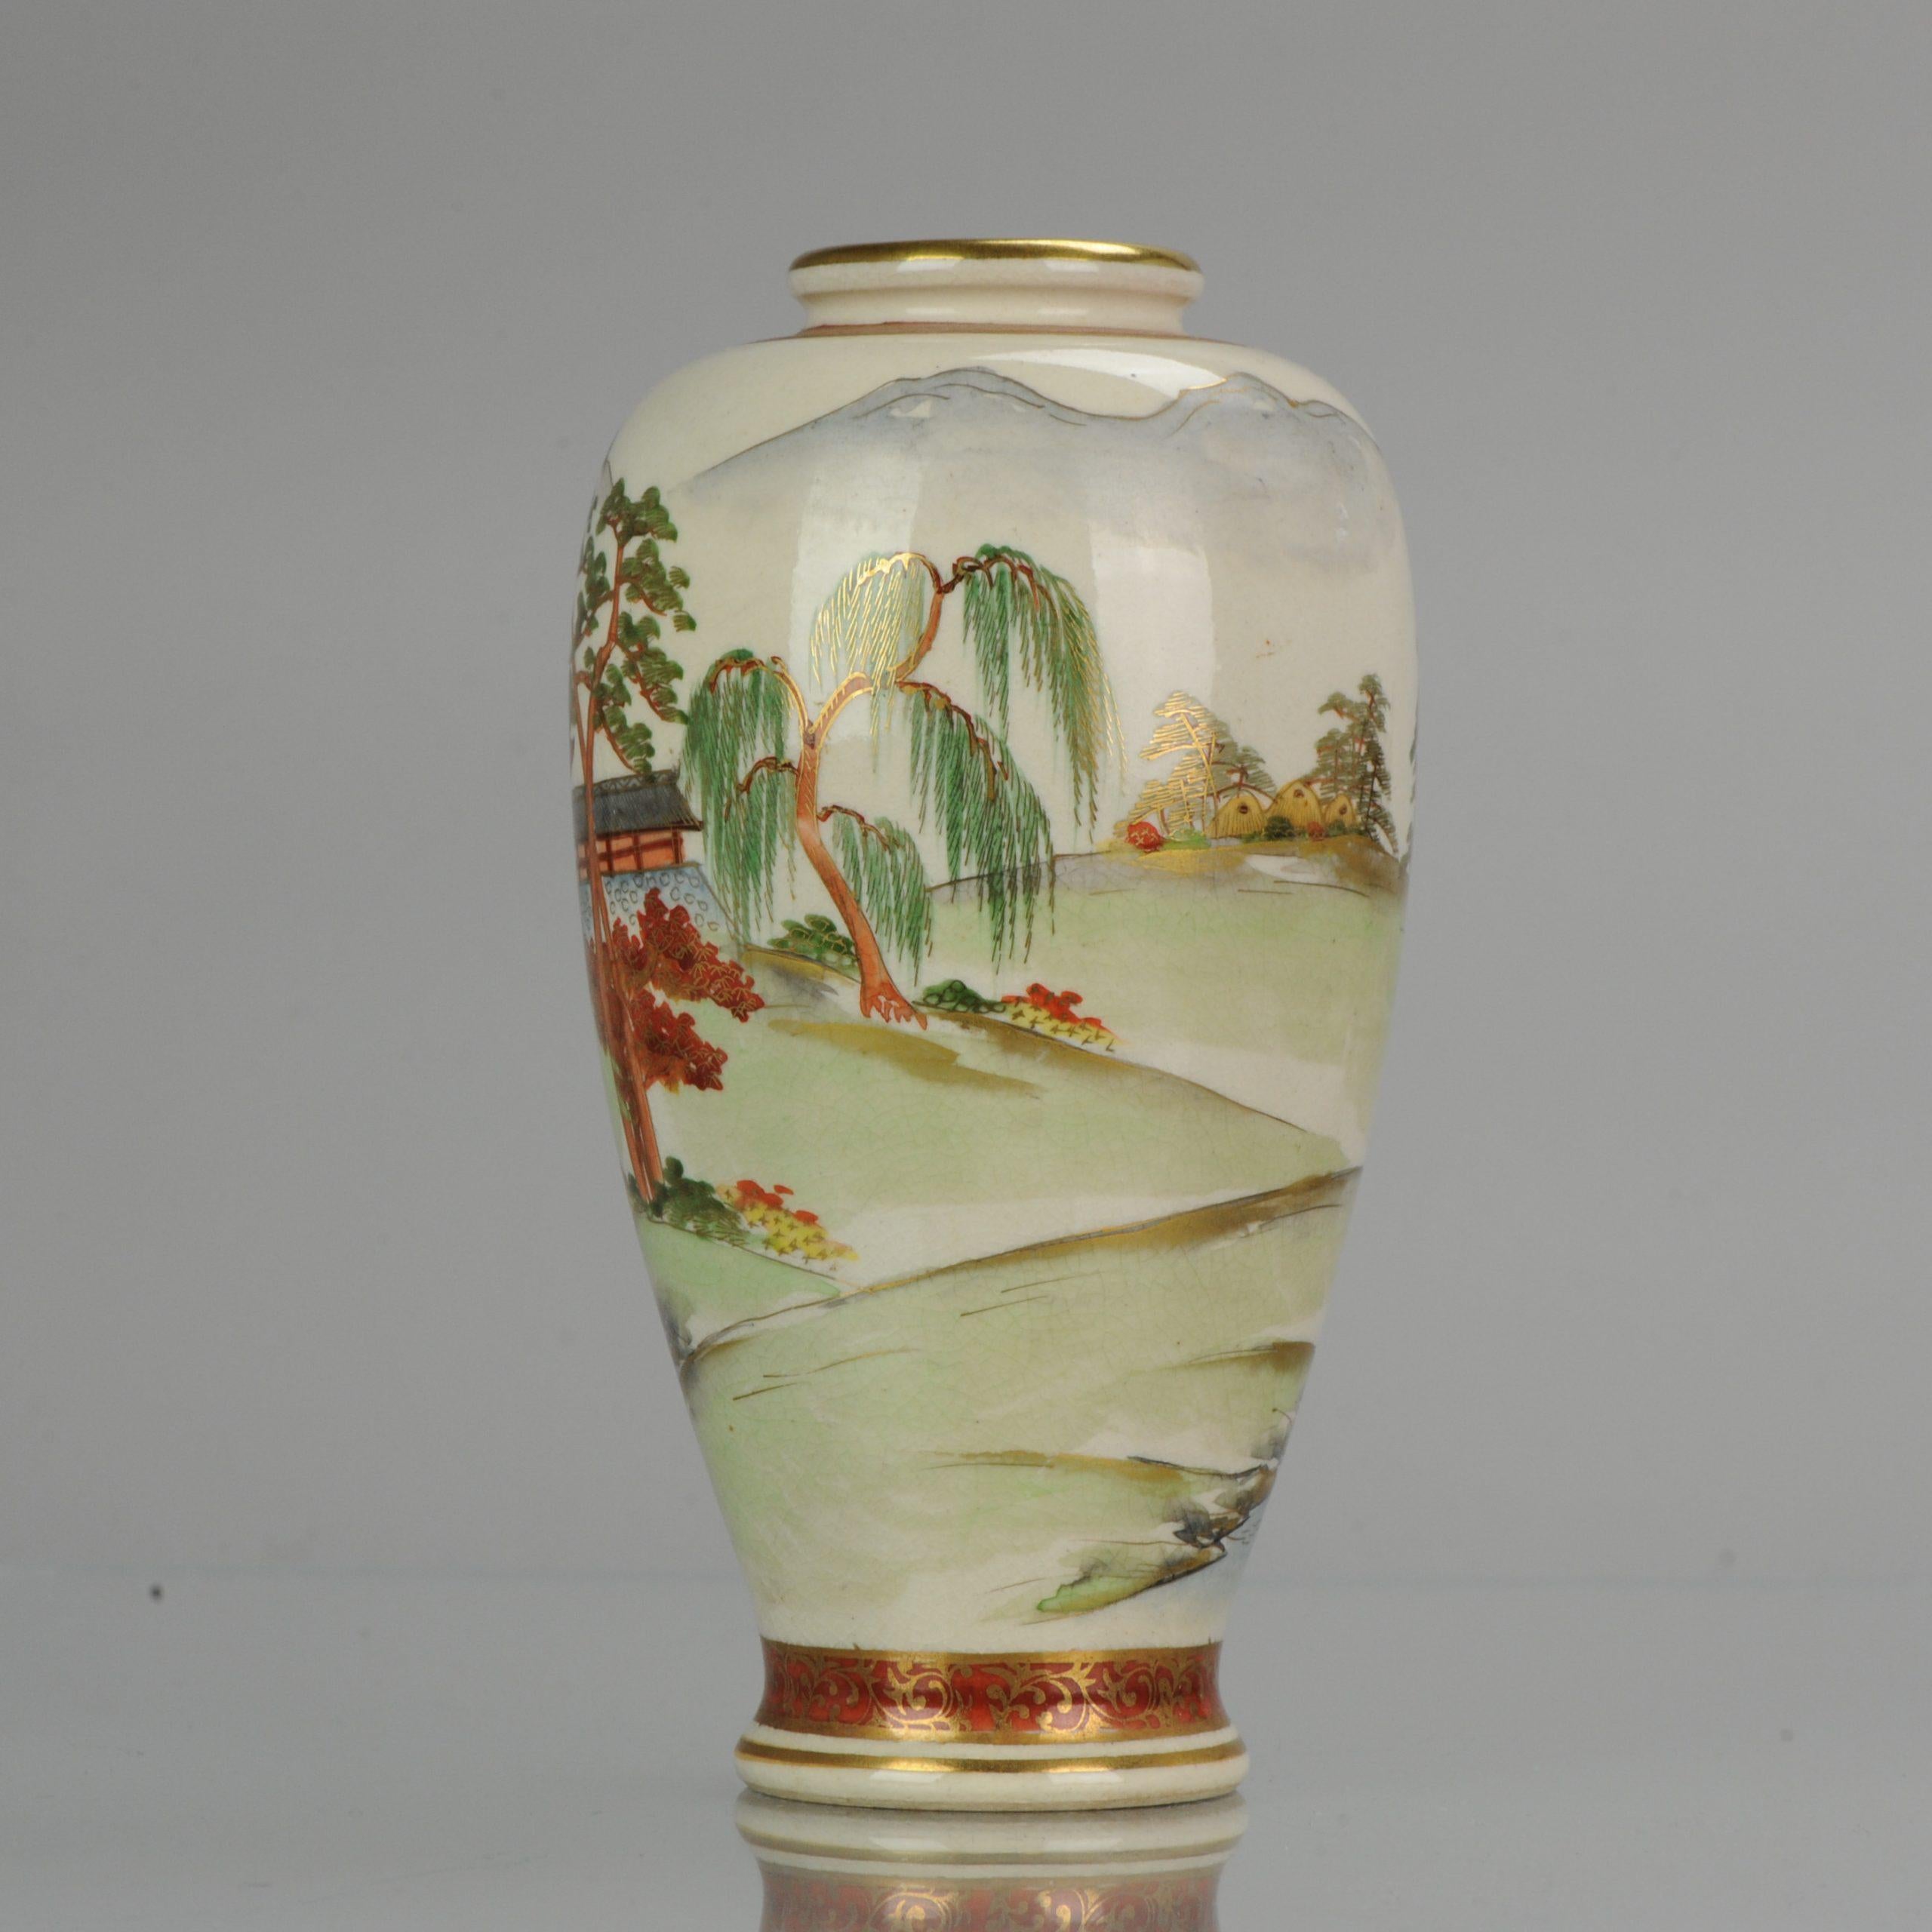 Fabulous Japanese vase.

Marked at base.

Condition:
Perfect. Size: 185mm high

Period:
Meiji Periode (1867-1912).